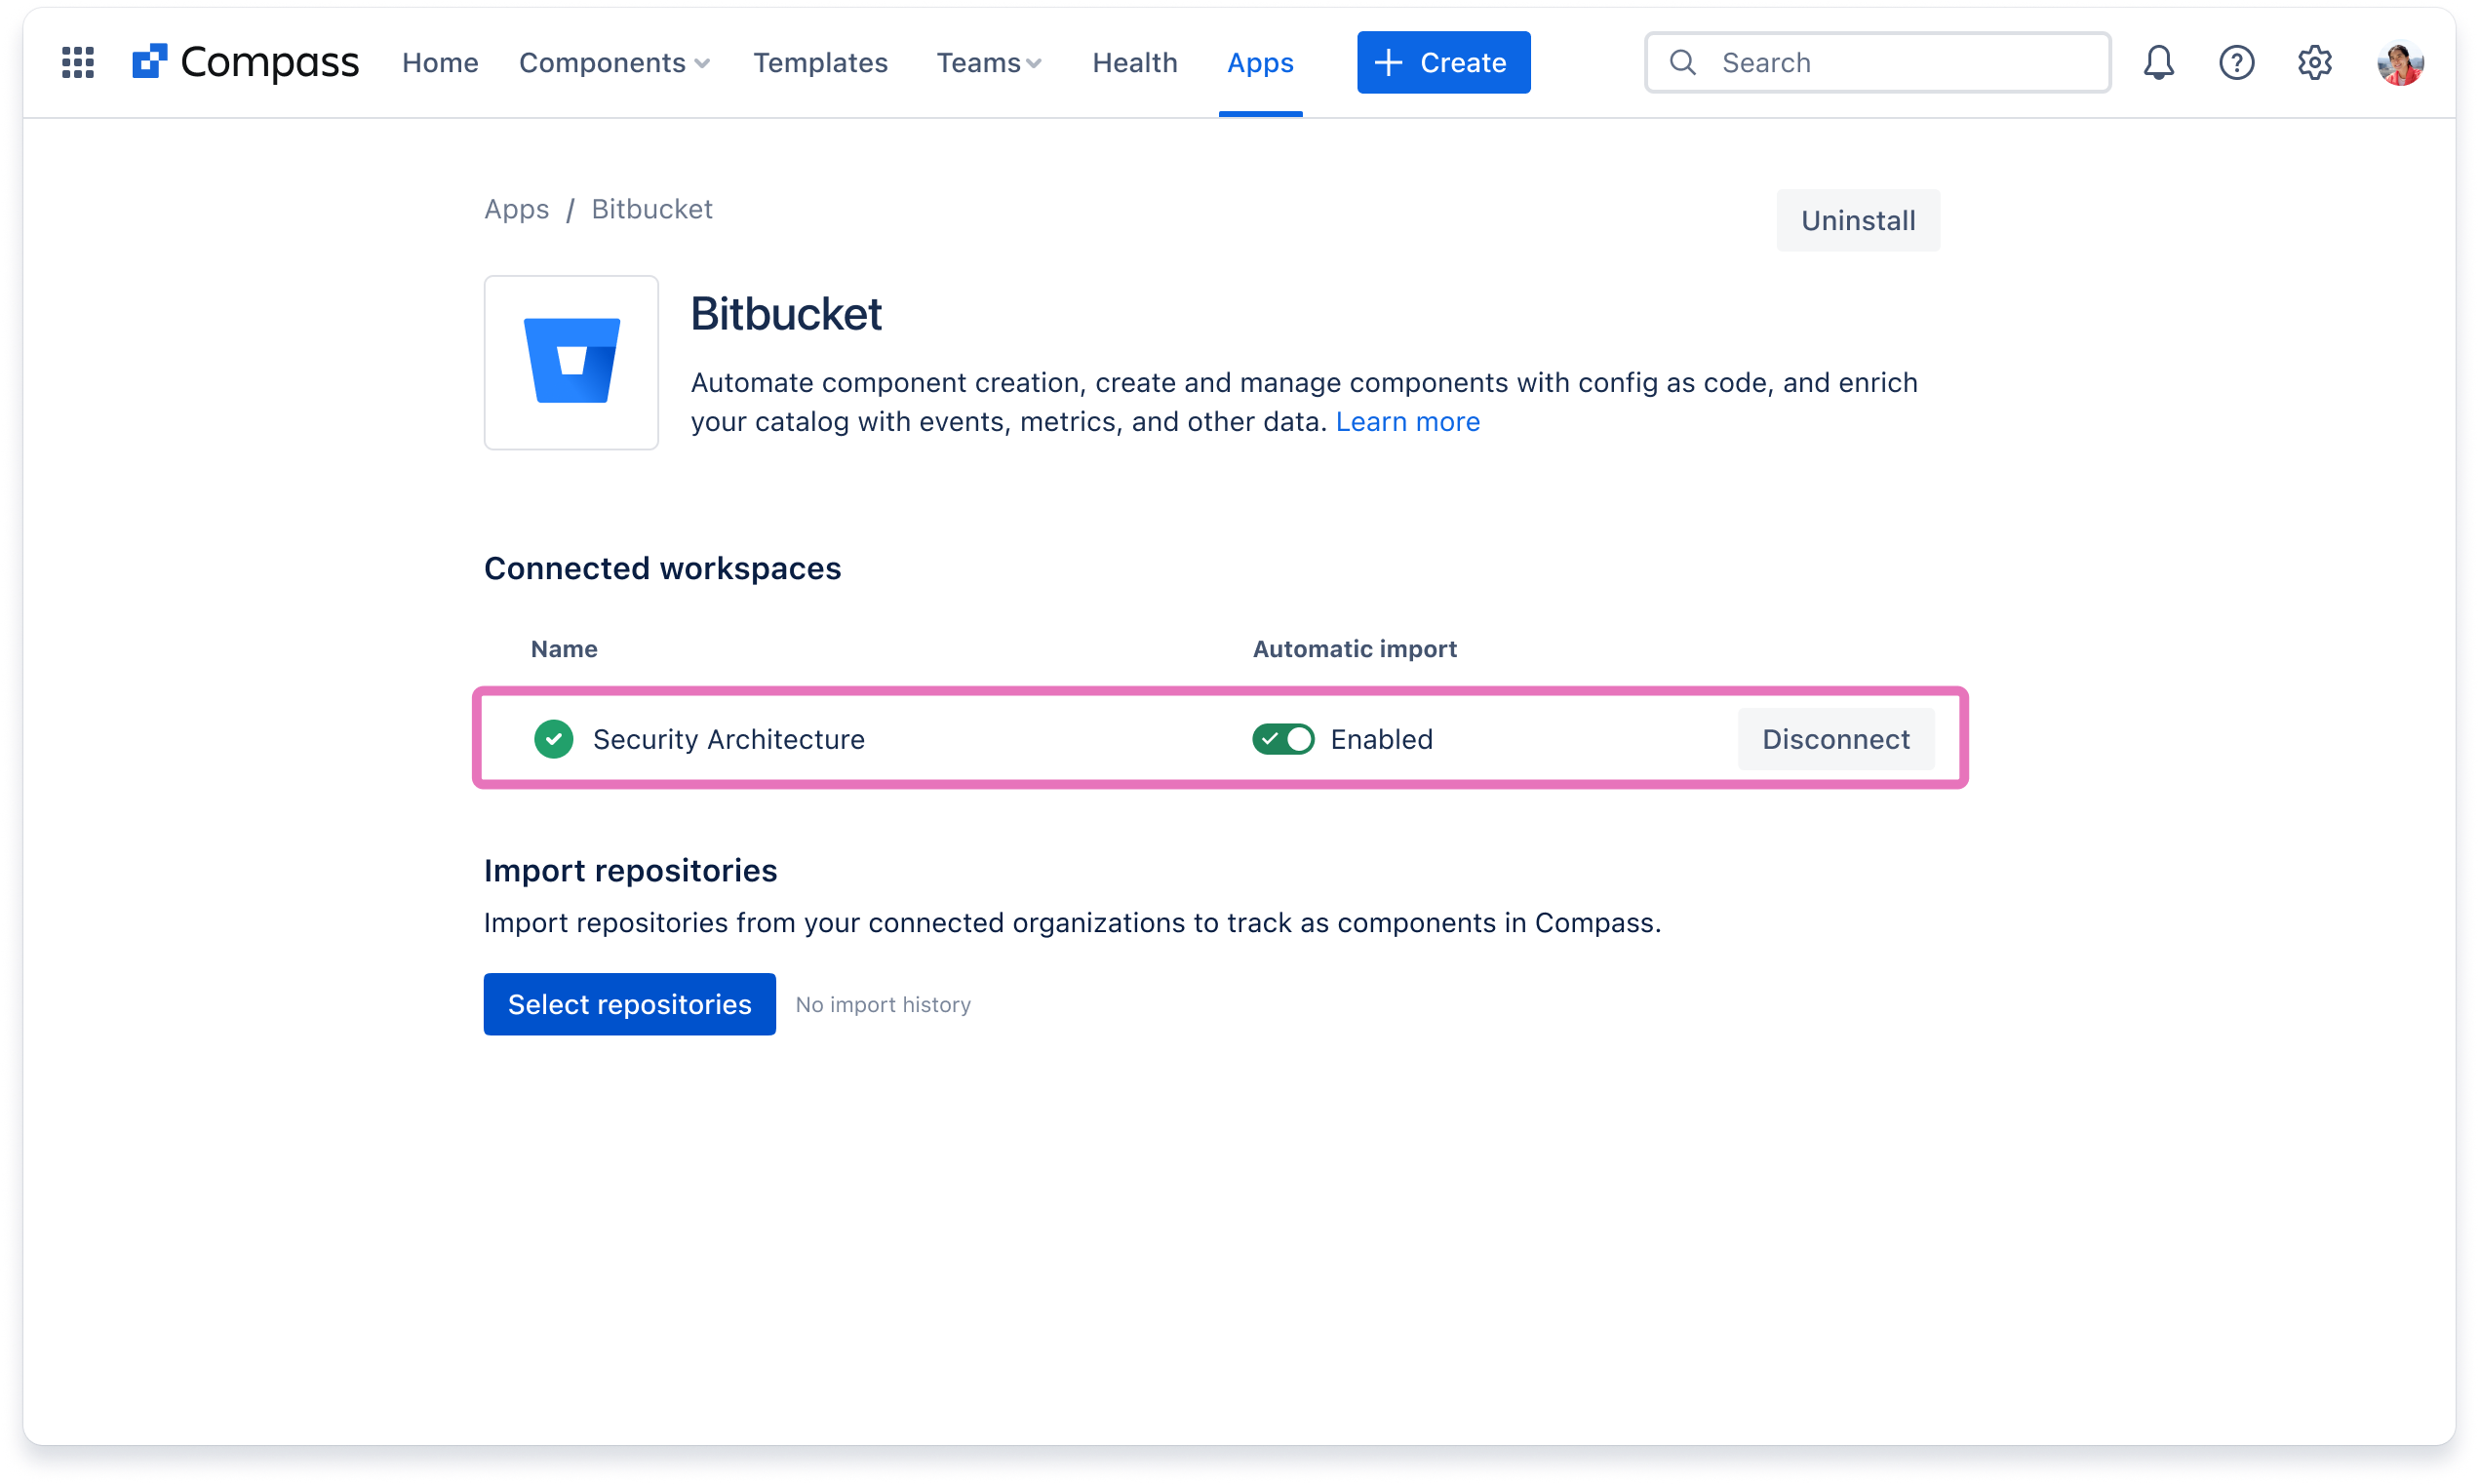 The Bitbucket app in Compass showing a successful connection to a Bitbucket workspace.